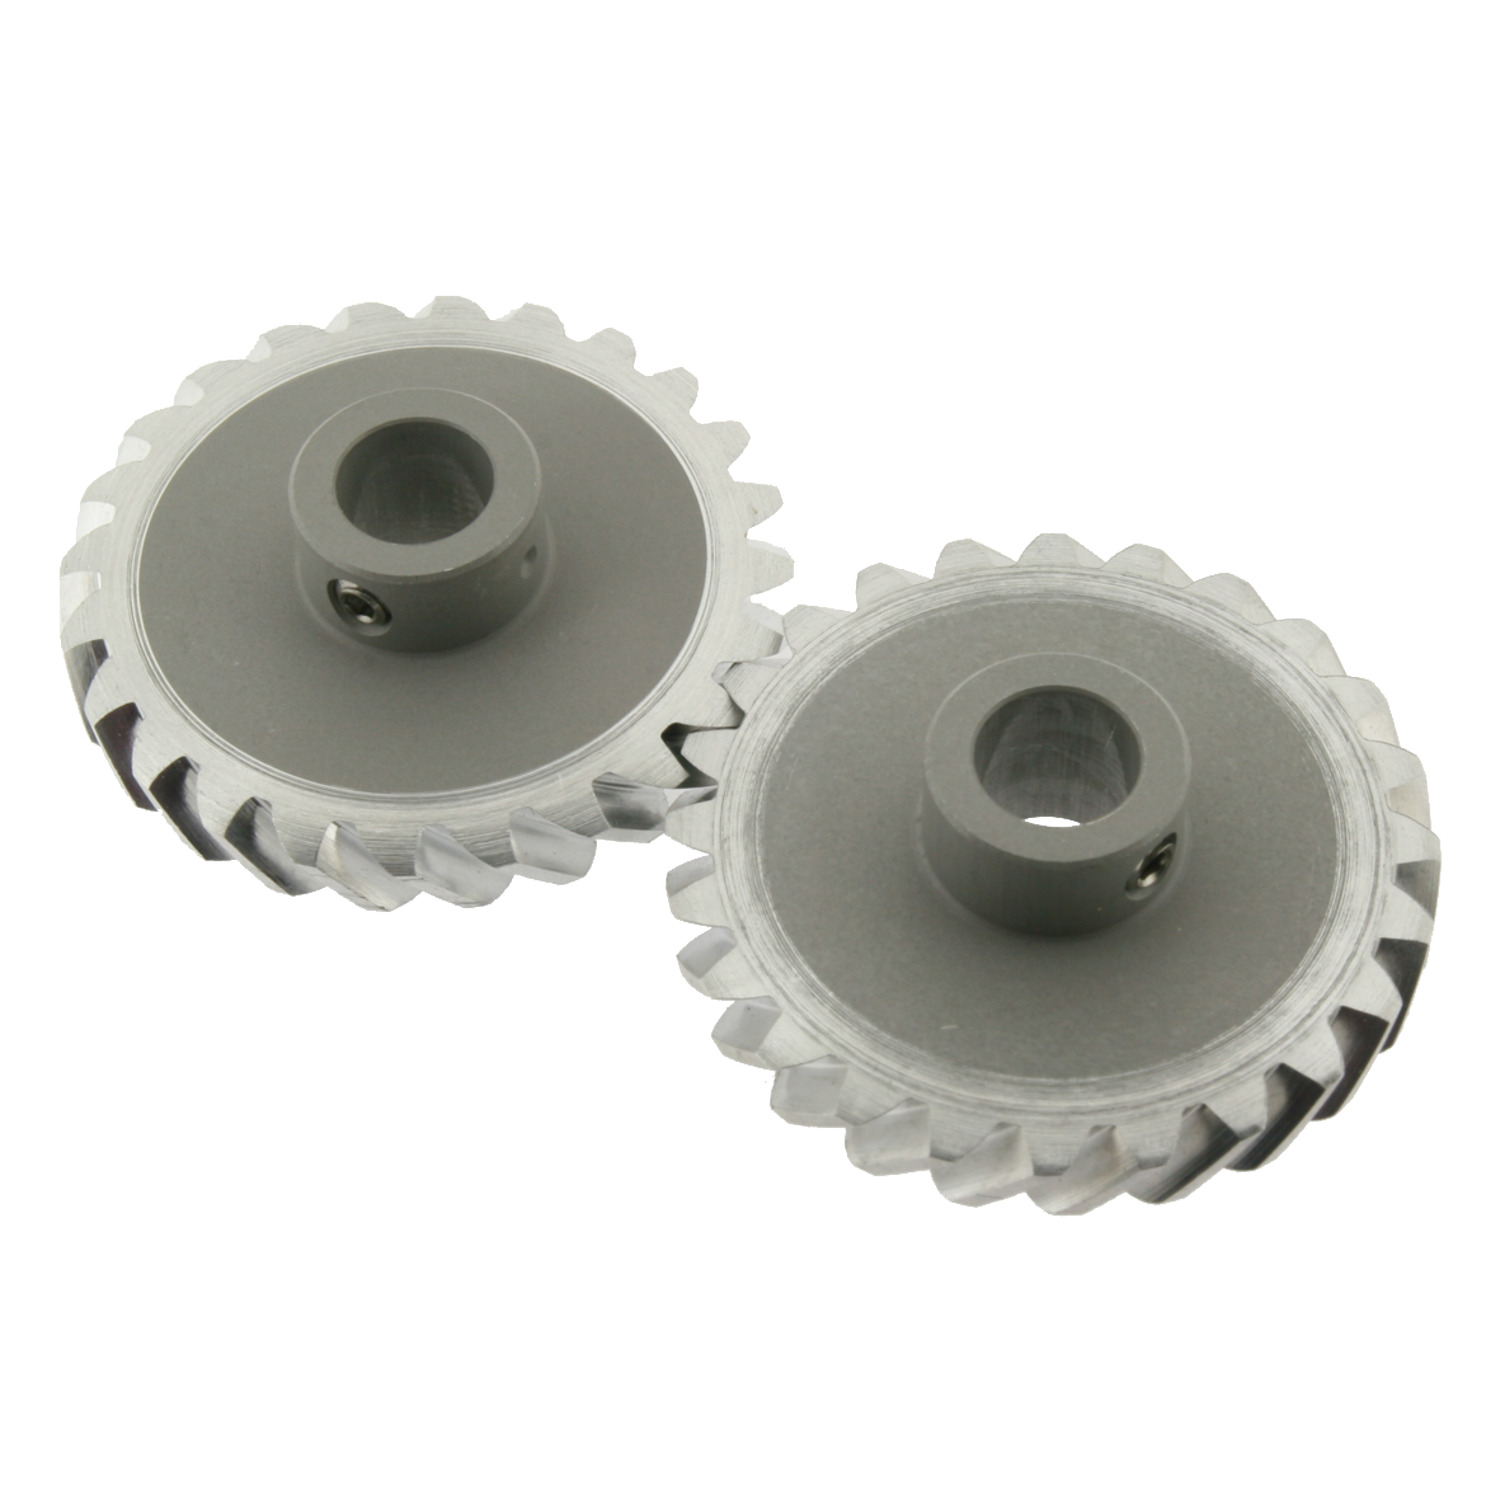 Product R2158, 0,8 Module Helical Gears stainless steel or aluminium, pin hub / 